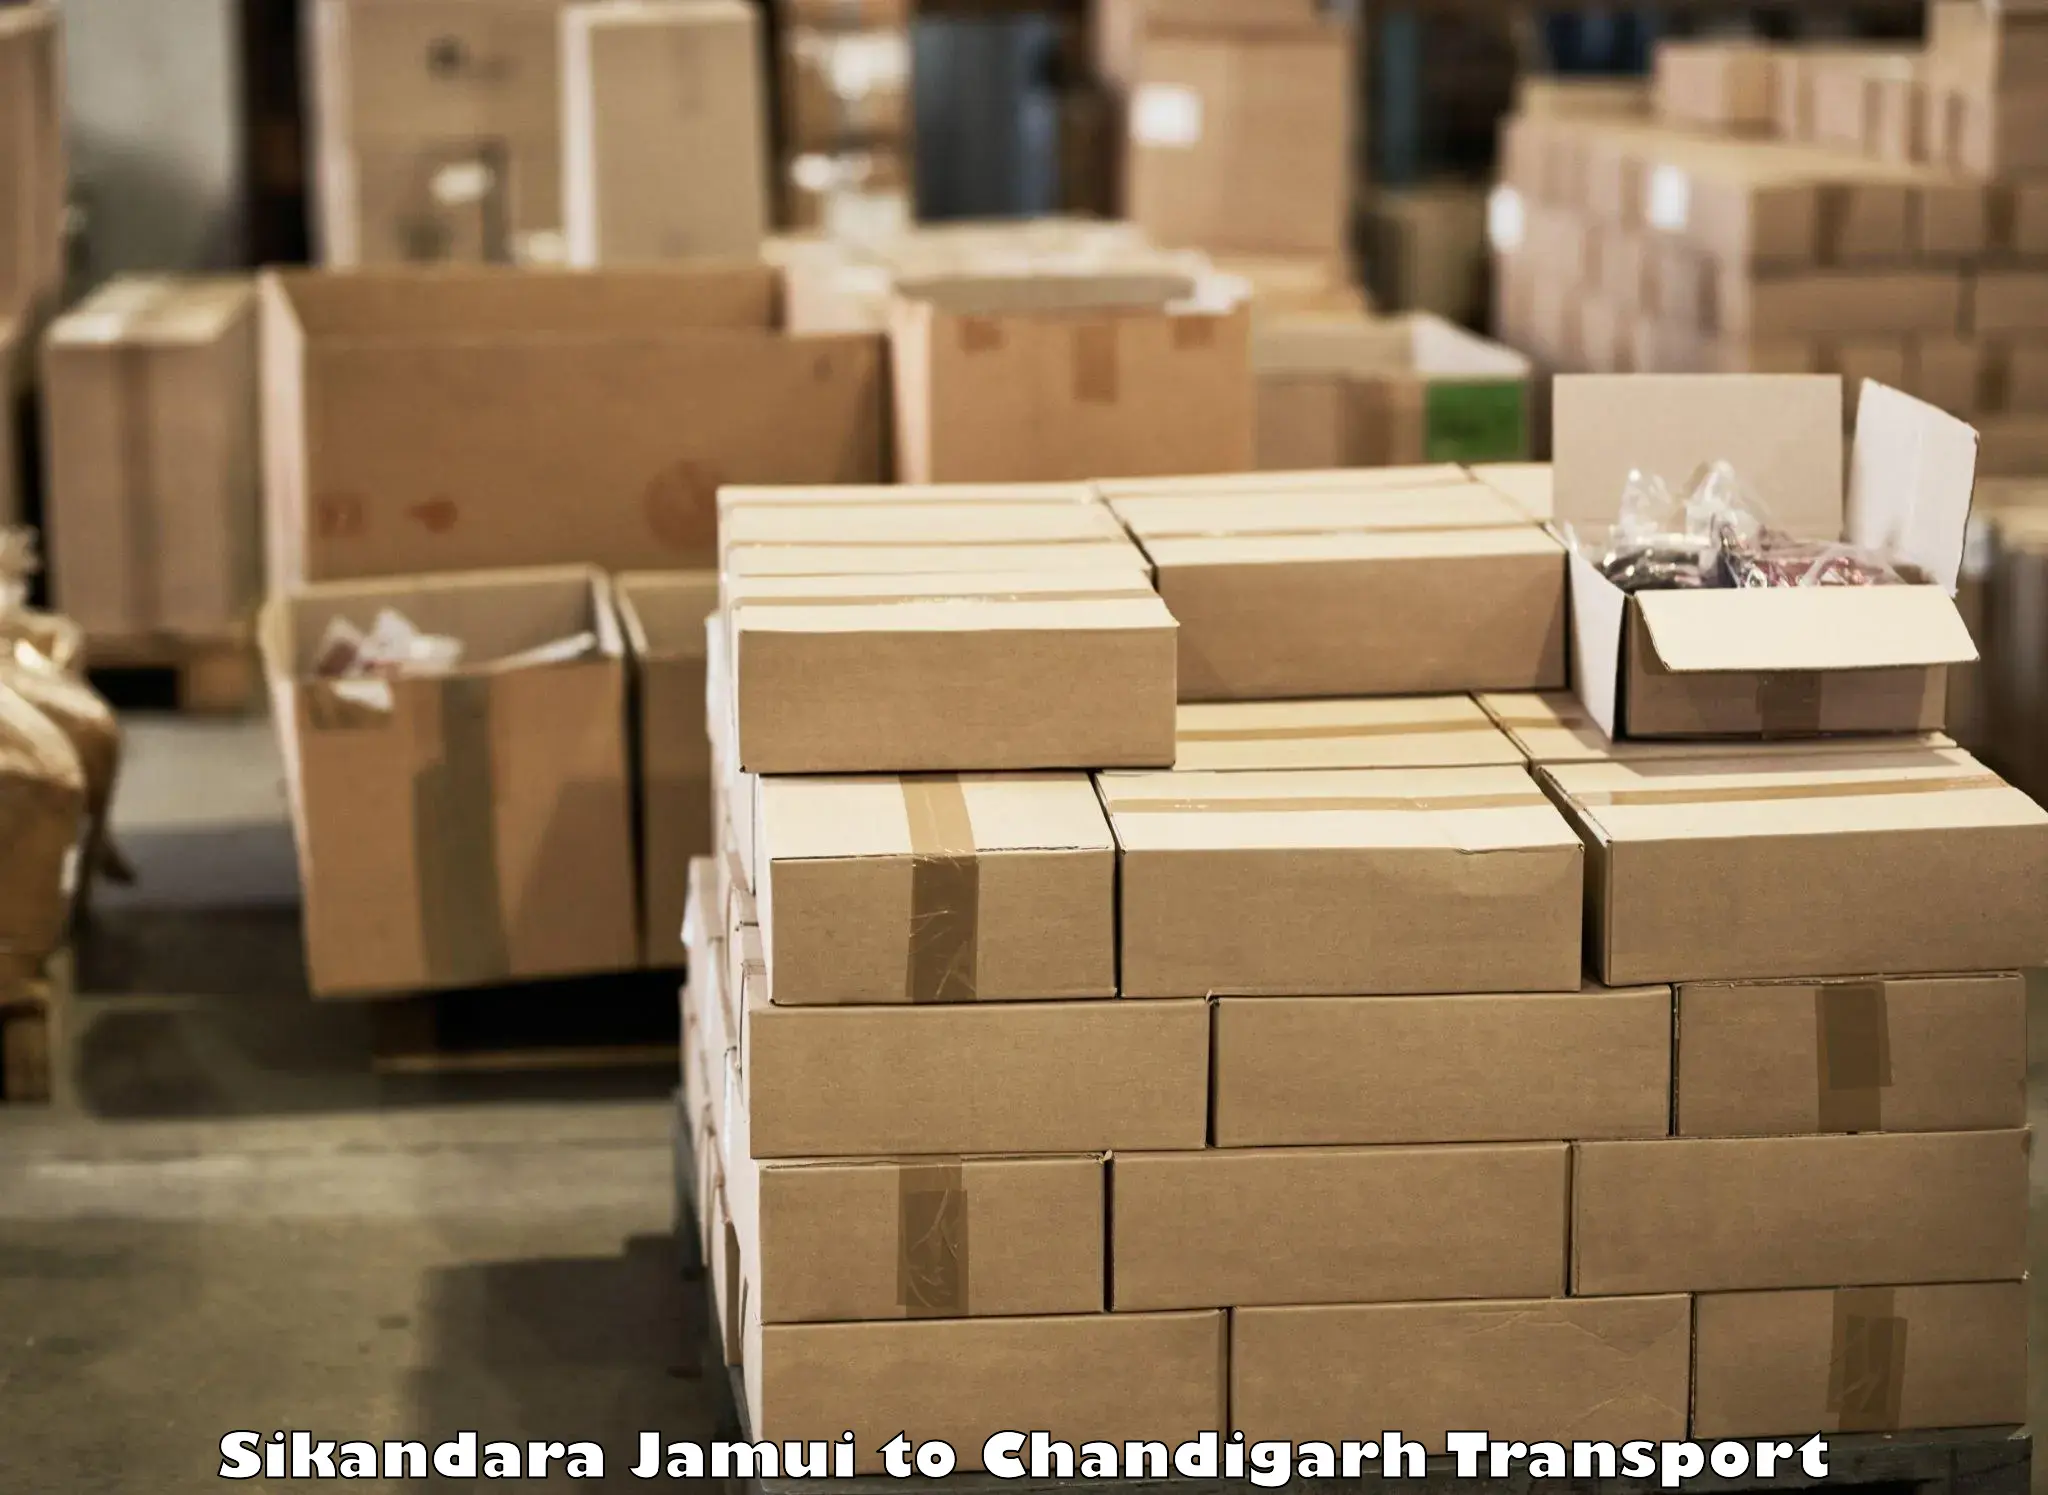 Commercial transport service Sikandara Jamui to Chandigarh